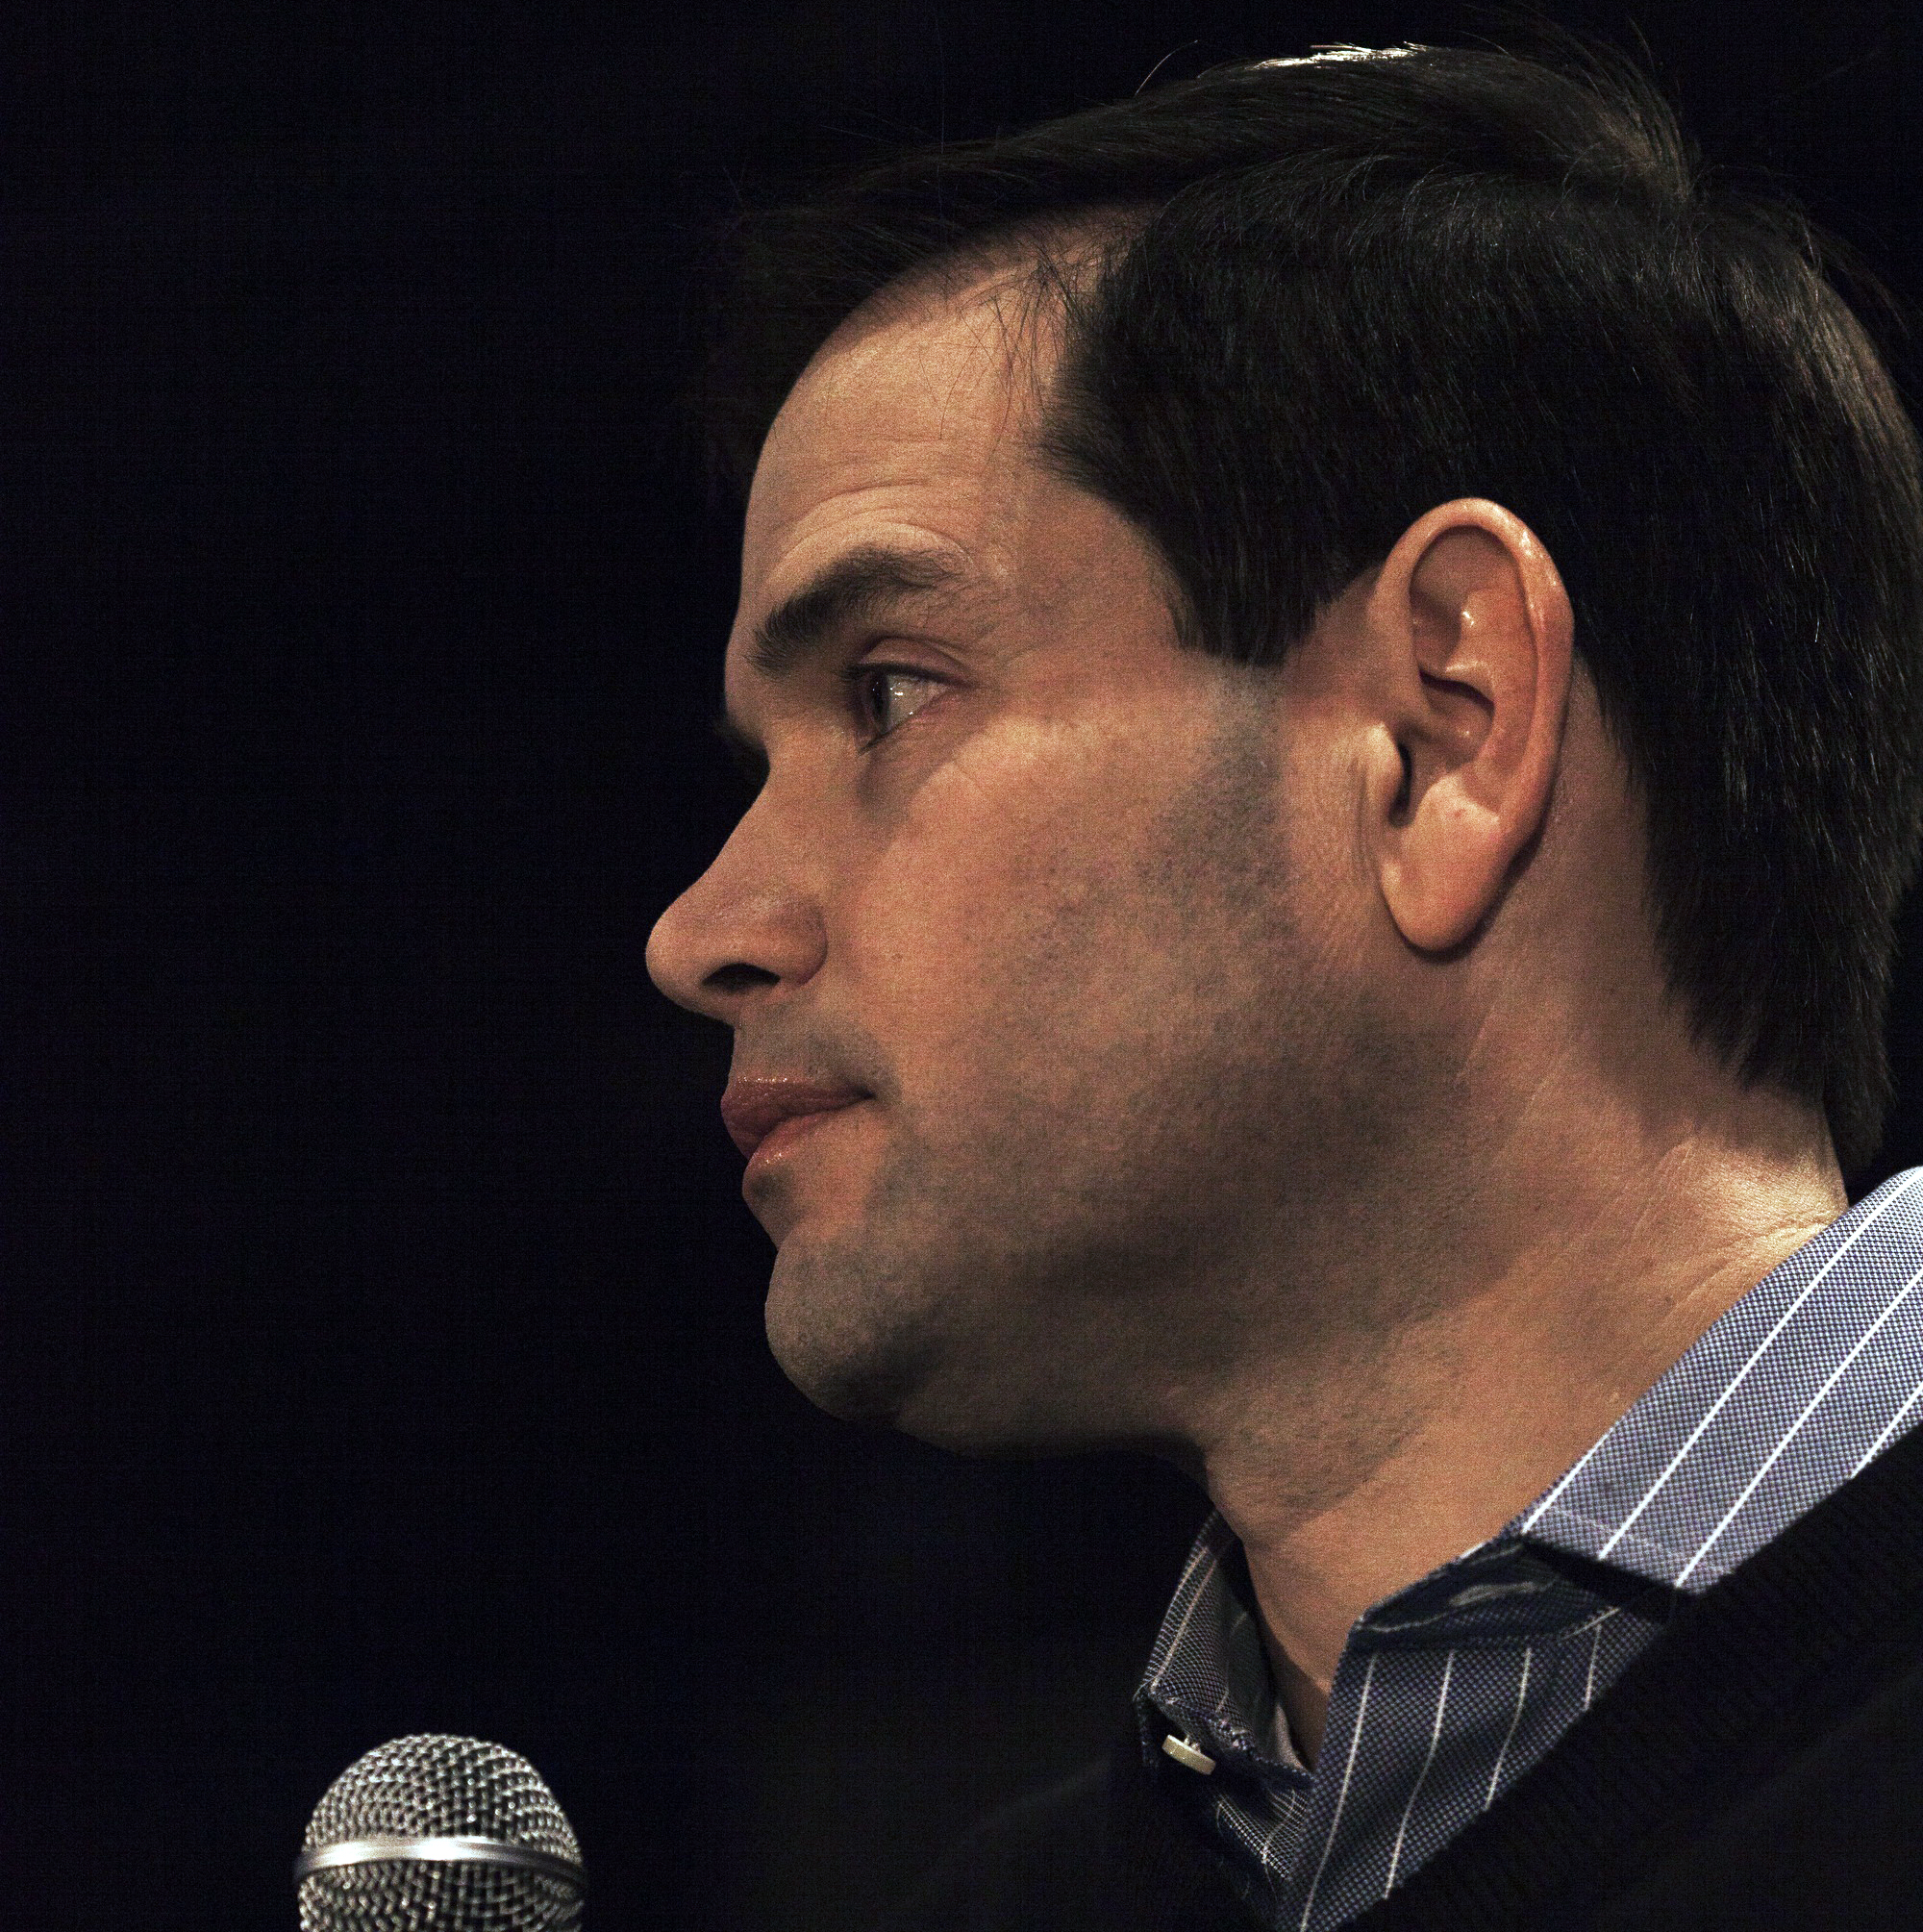 Marco Rubio speaks to supporters at a campaign rally in Des Moines, Iowa on Jan. 27, 2016.